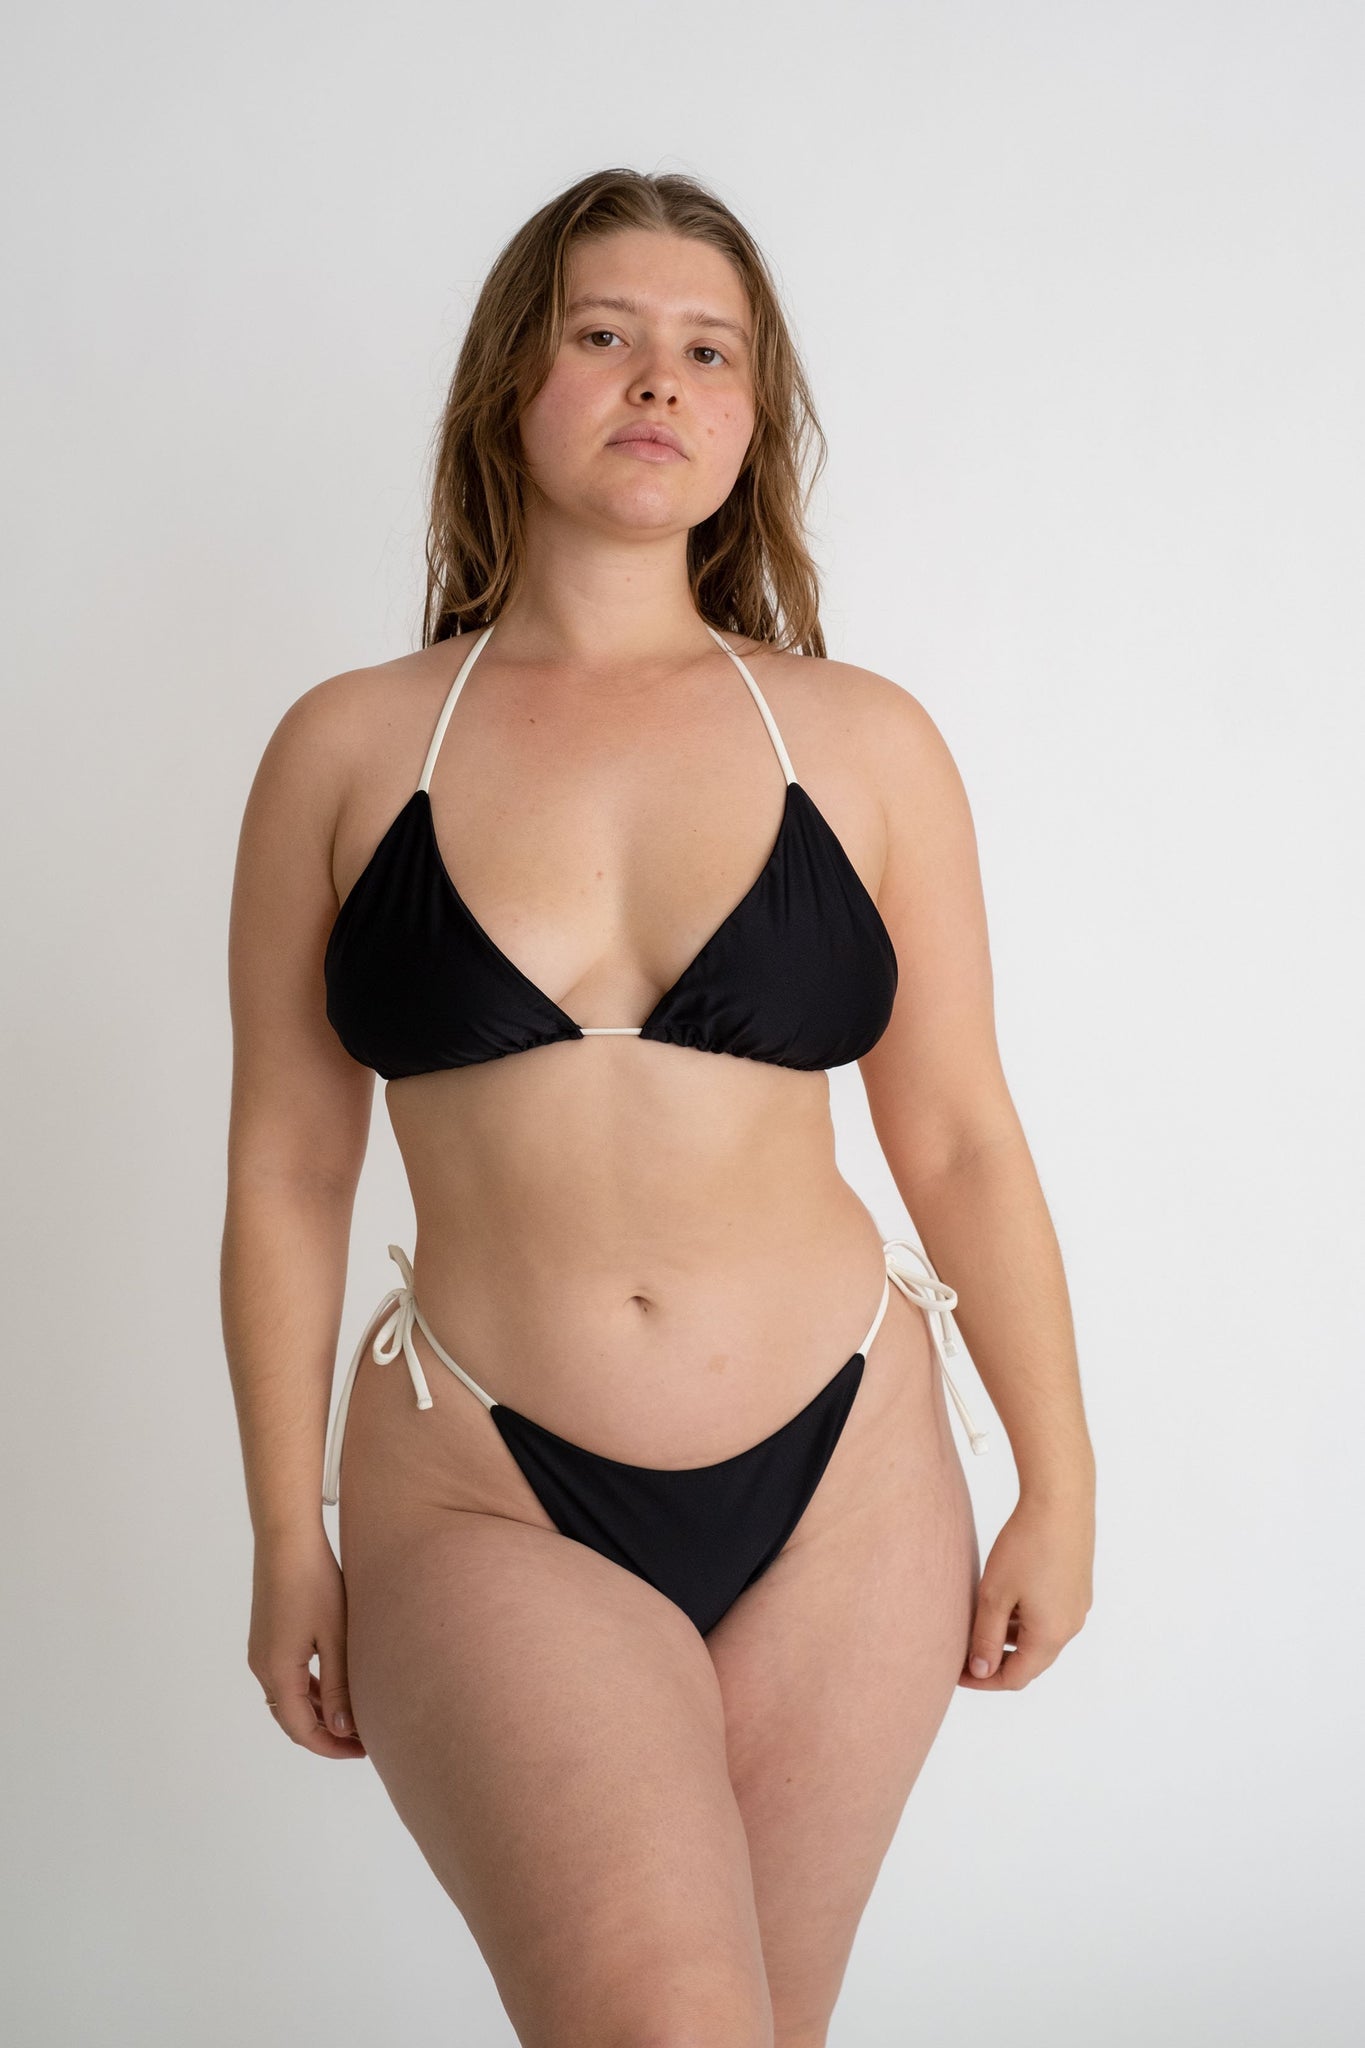 A woman standing with her arms relaxed by her sides wearing a black triangle bikini top with adjustable white straps and black triangle bikini bottoms with white strings.